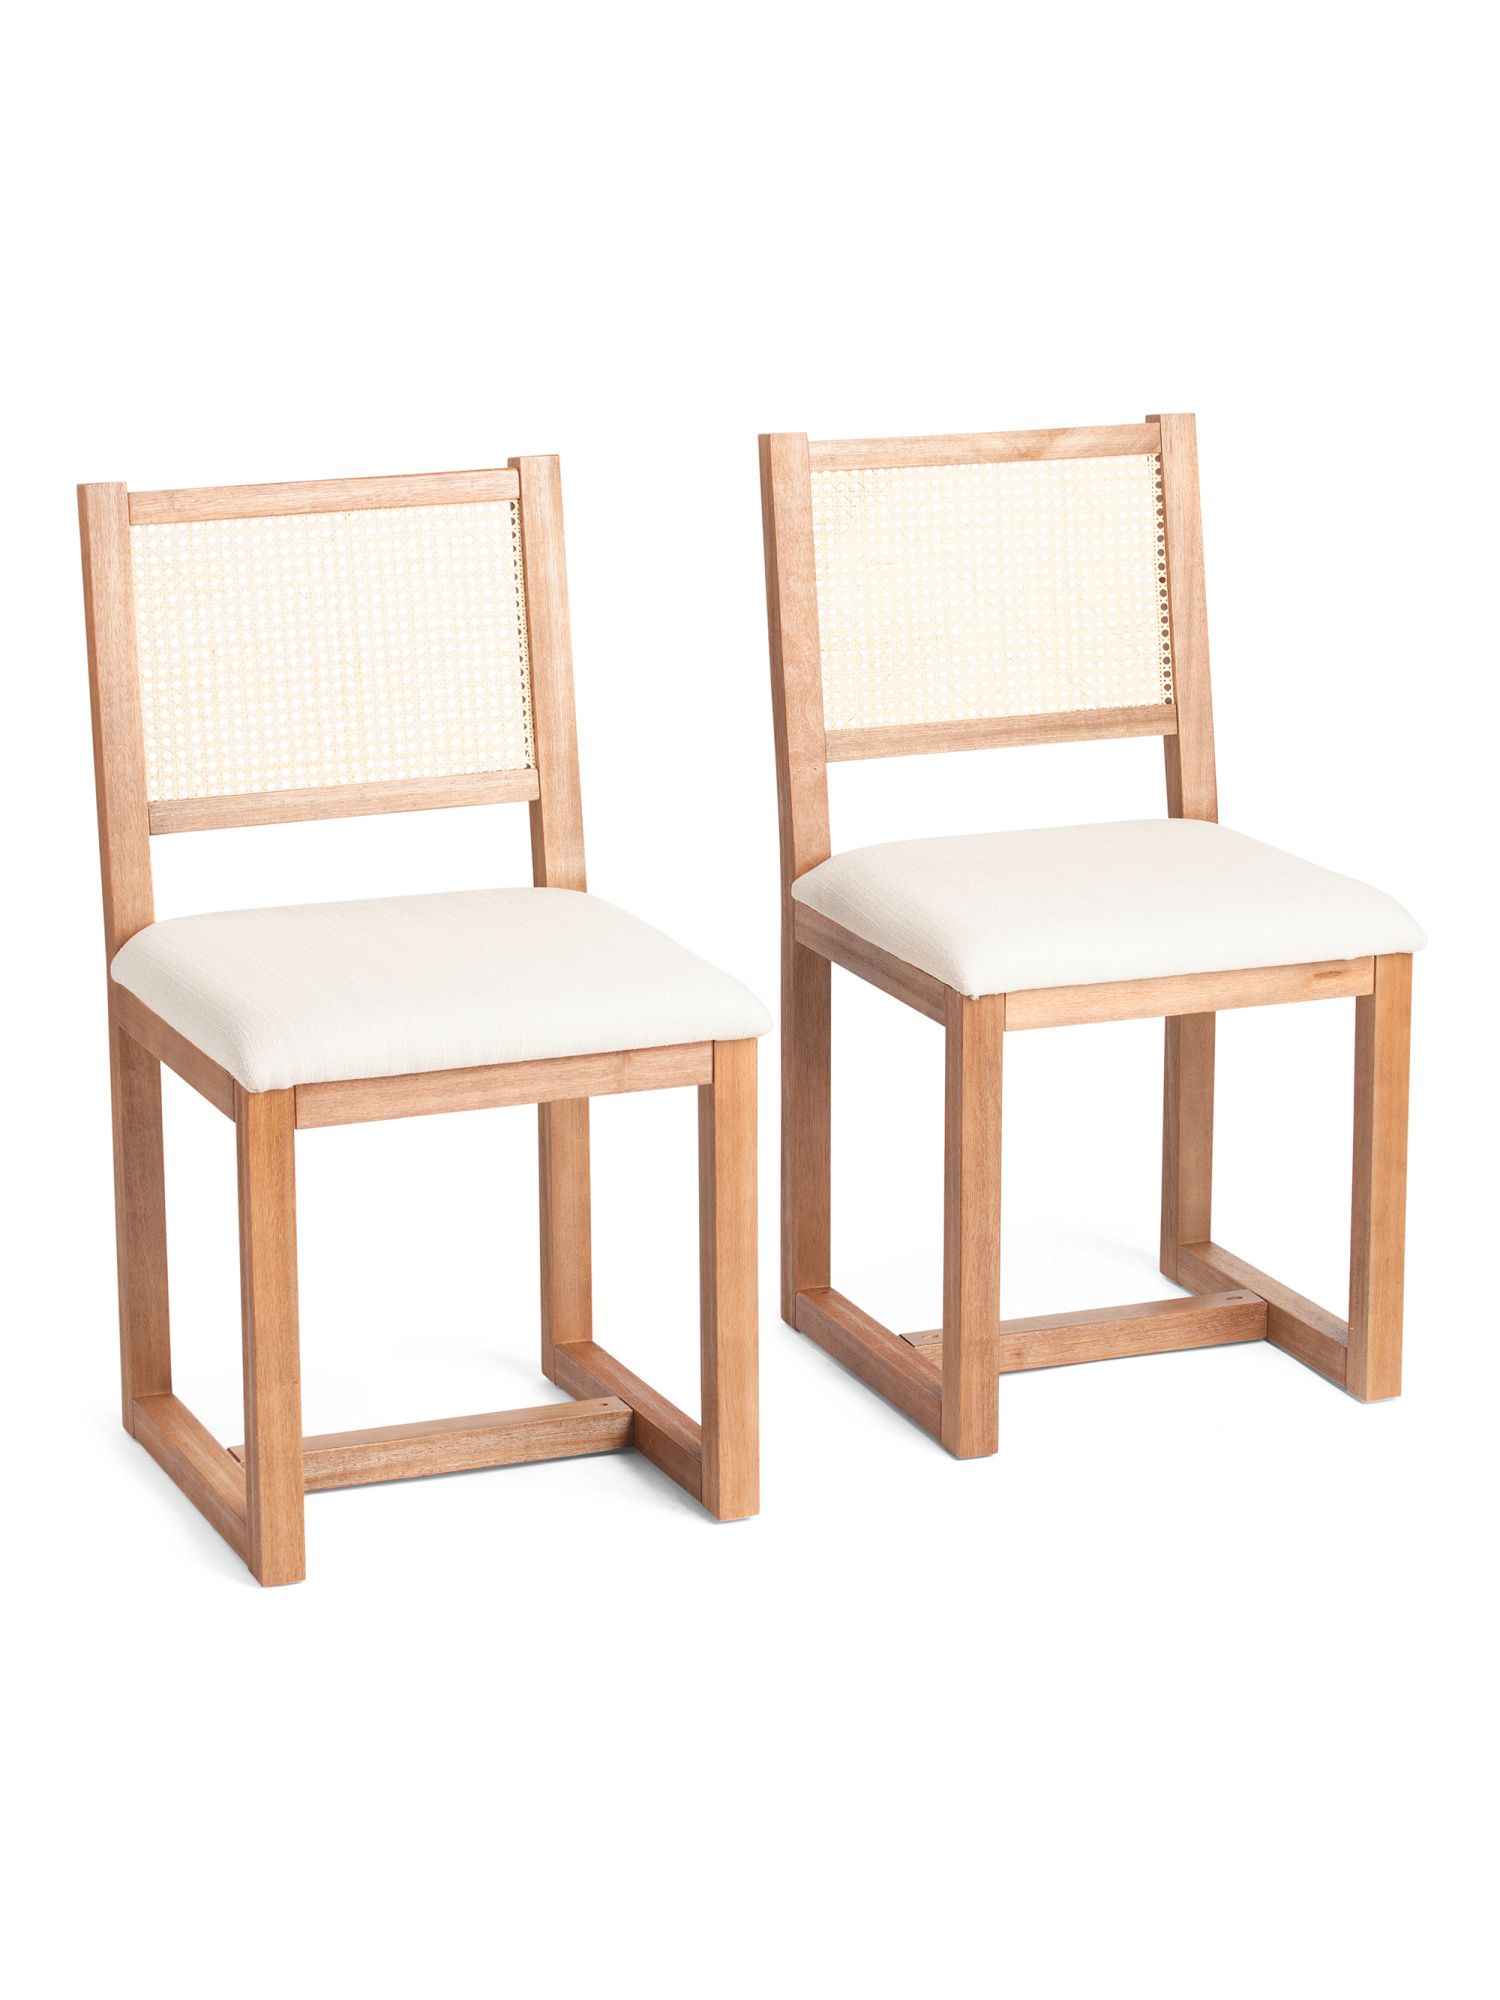 Set Of 2 Rattan Back Dining Chairs With Cushion Seats | TJ Maxx